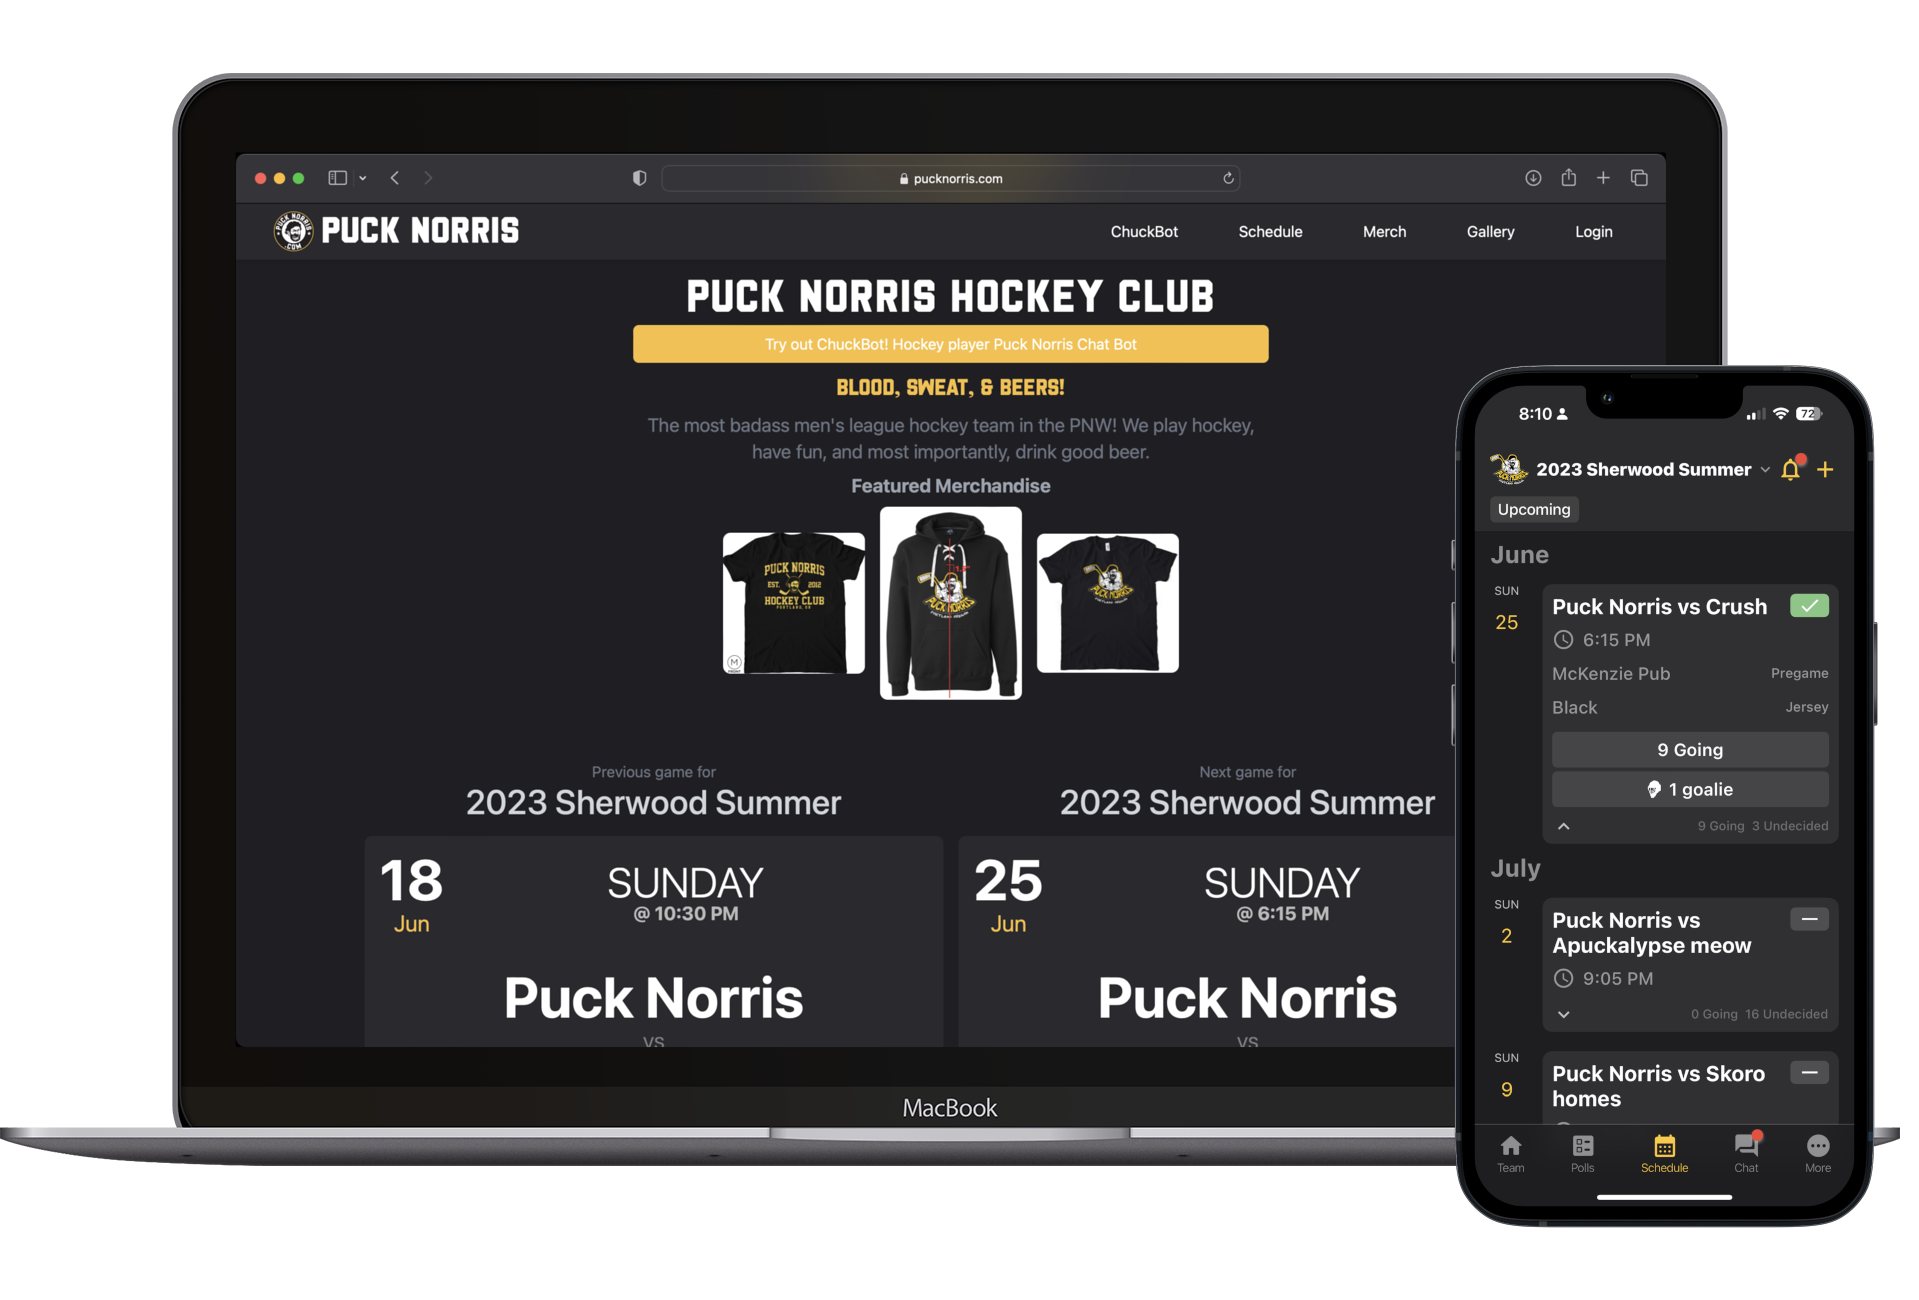 Puck norris app and site